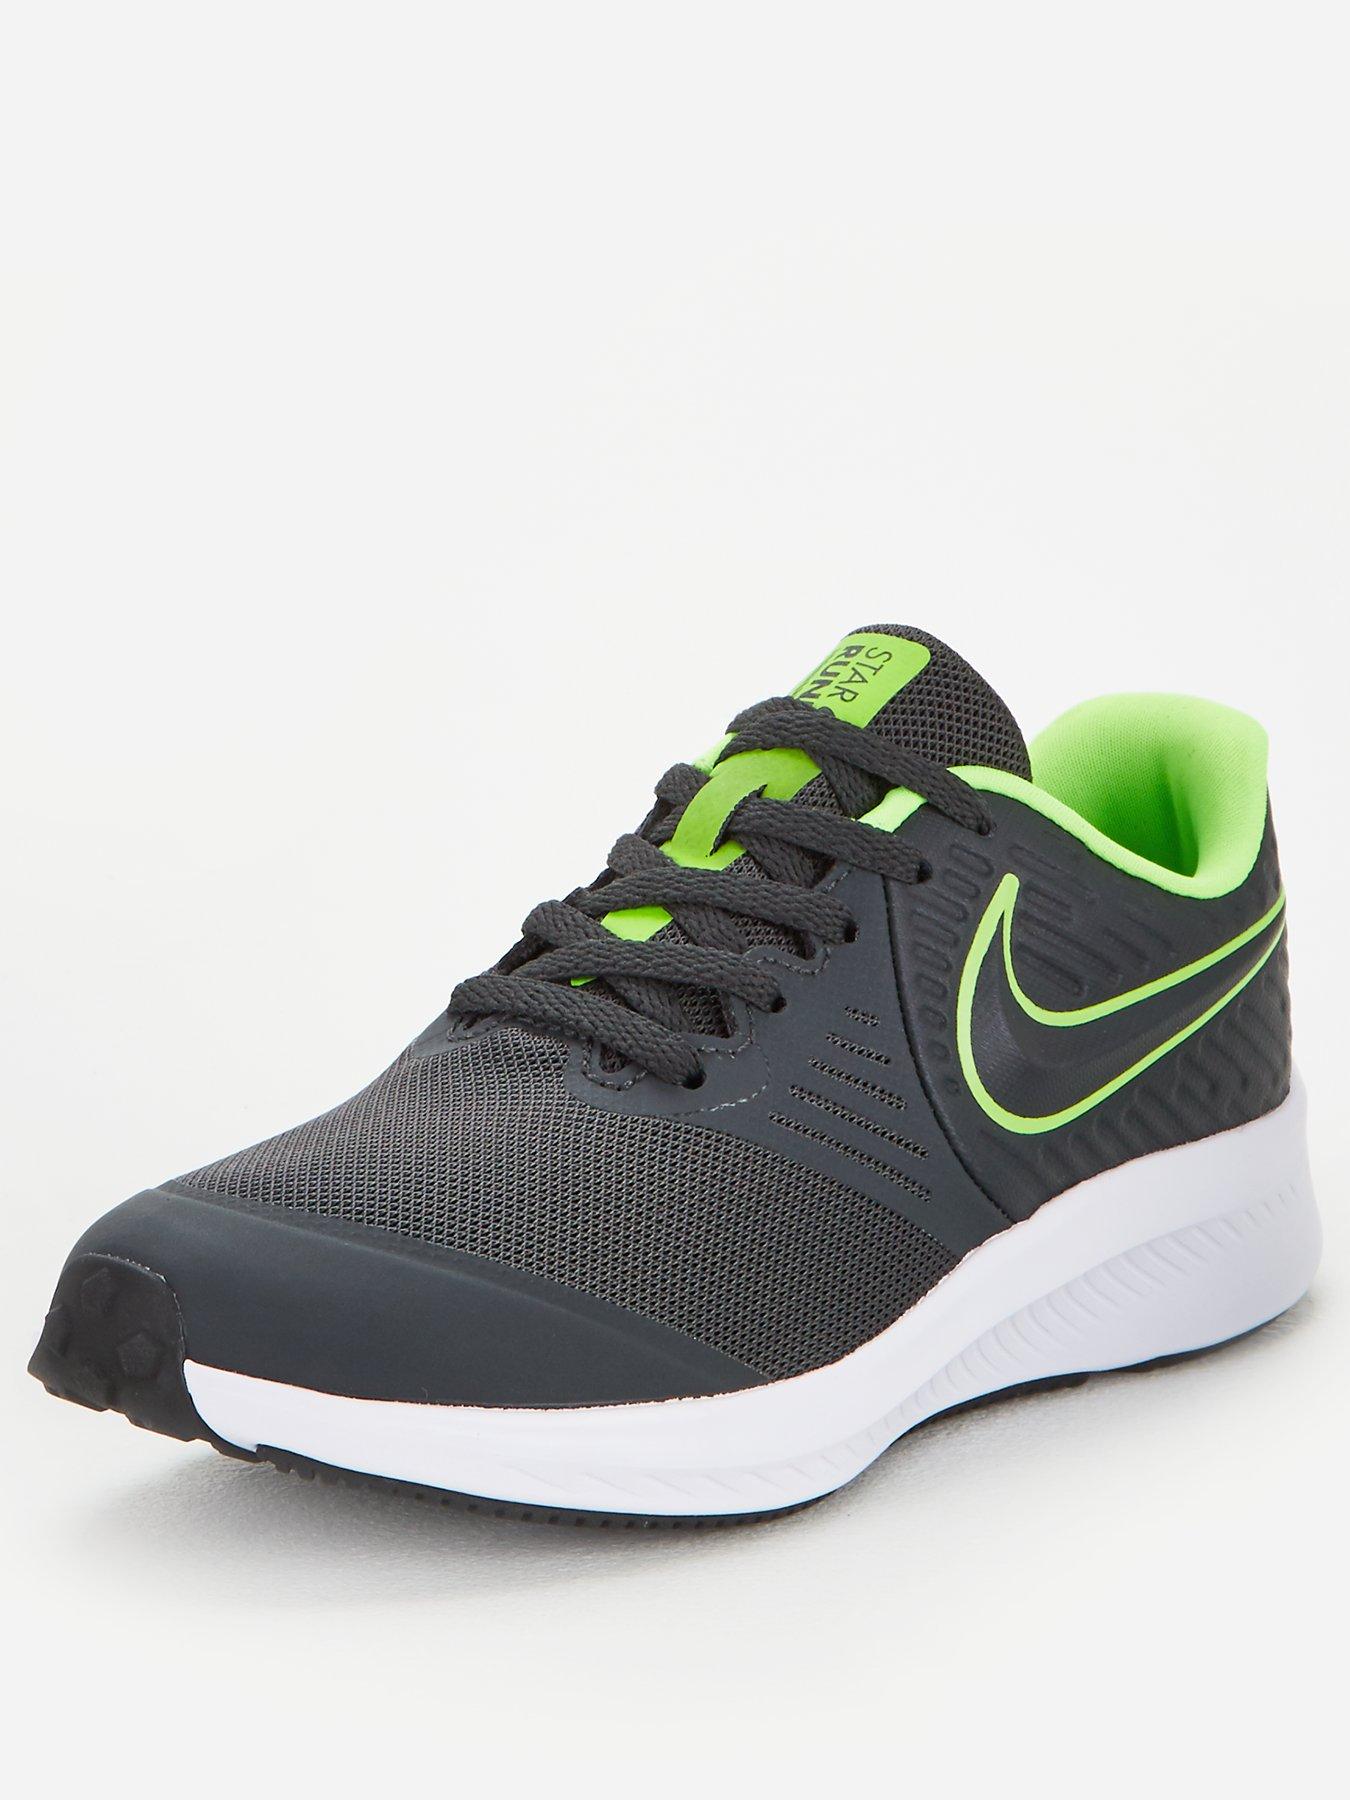 black and green nike trainers